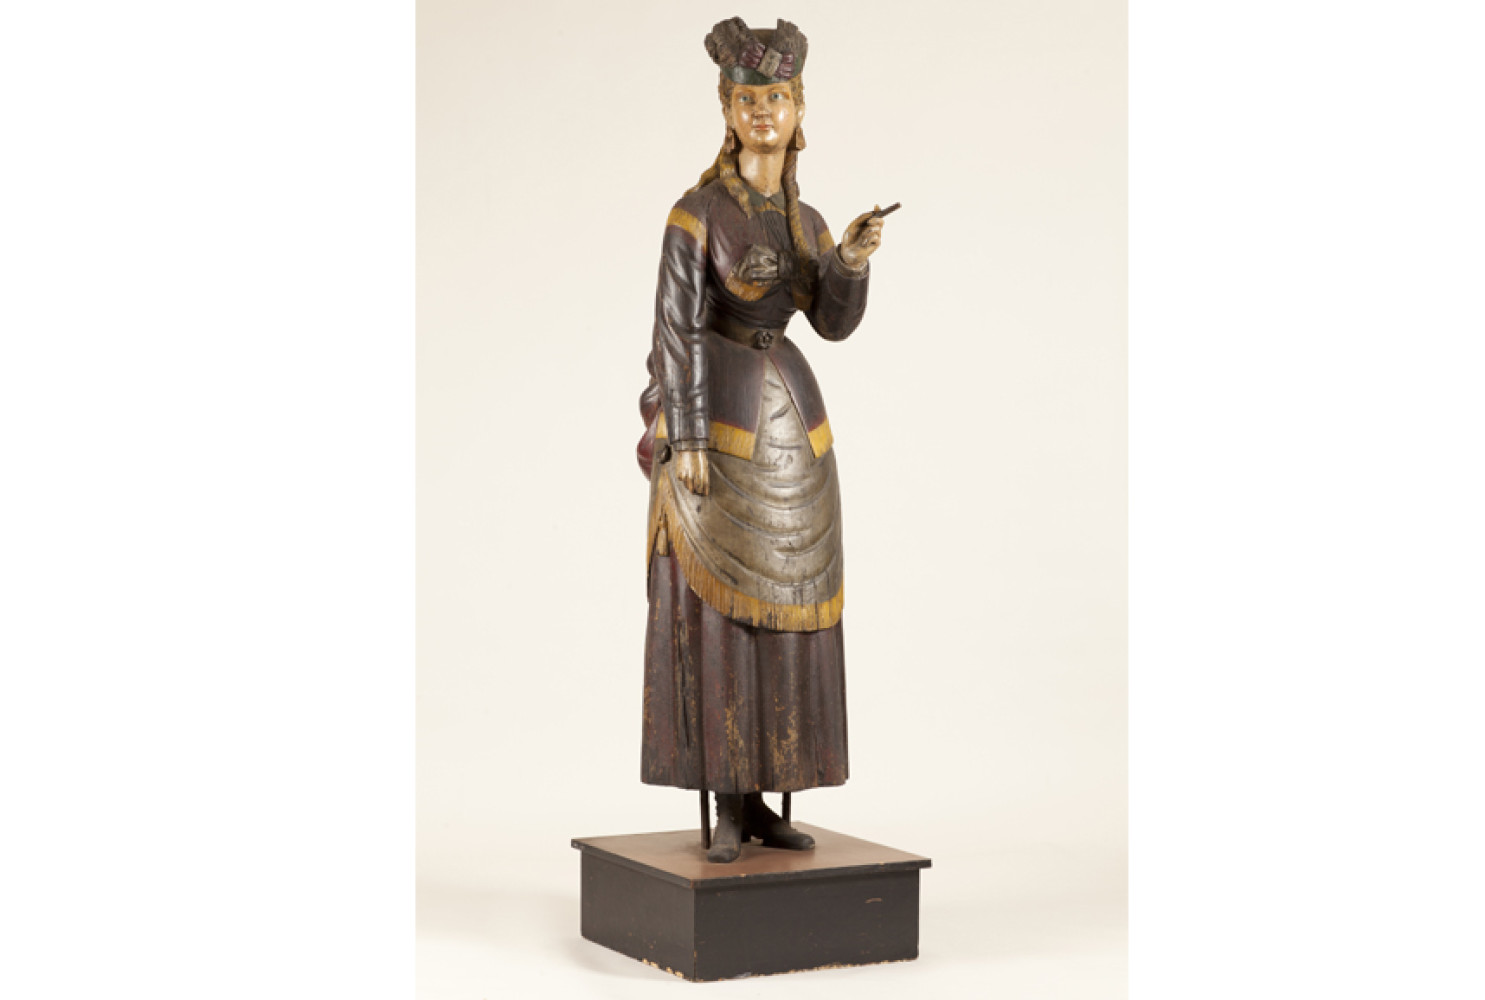 Girl of the Period, 1870—1885, Possibly workshop of Samuel Robb (American, 1851—1928), White pine and paint, Courtesy of the Barbara L. Gordon Collection
